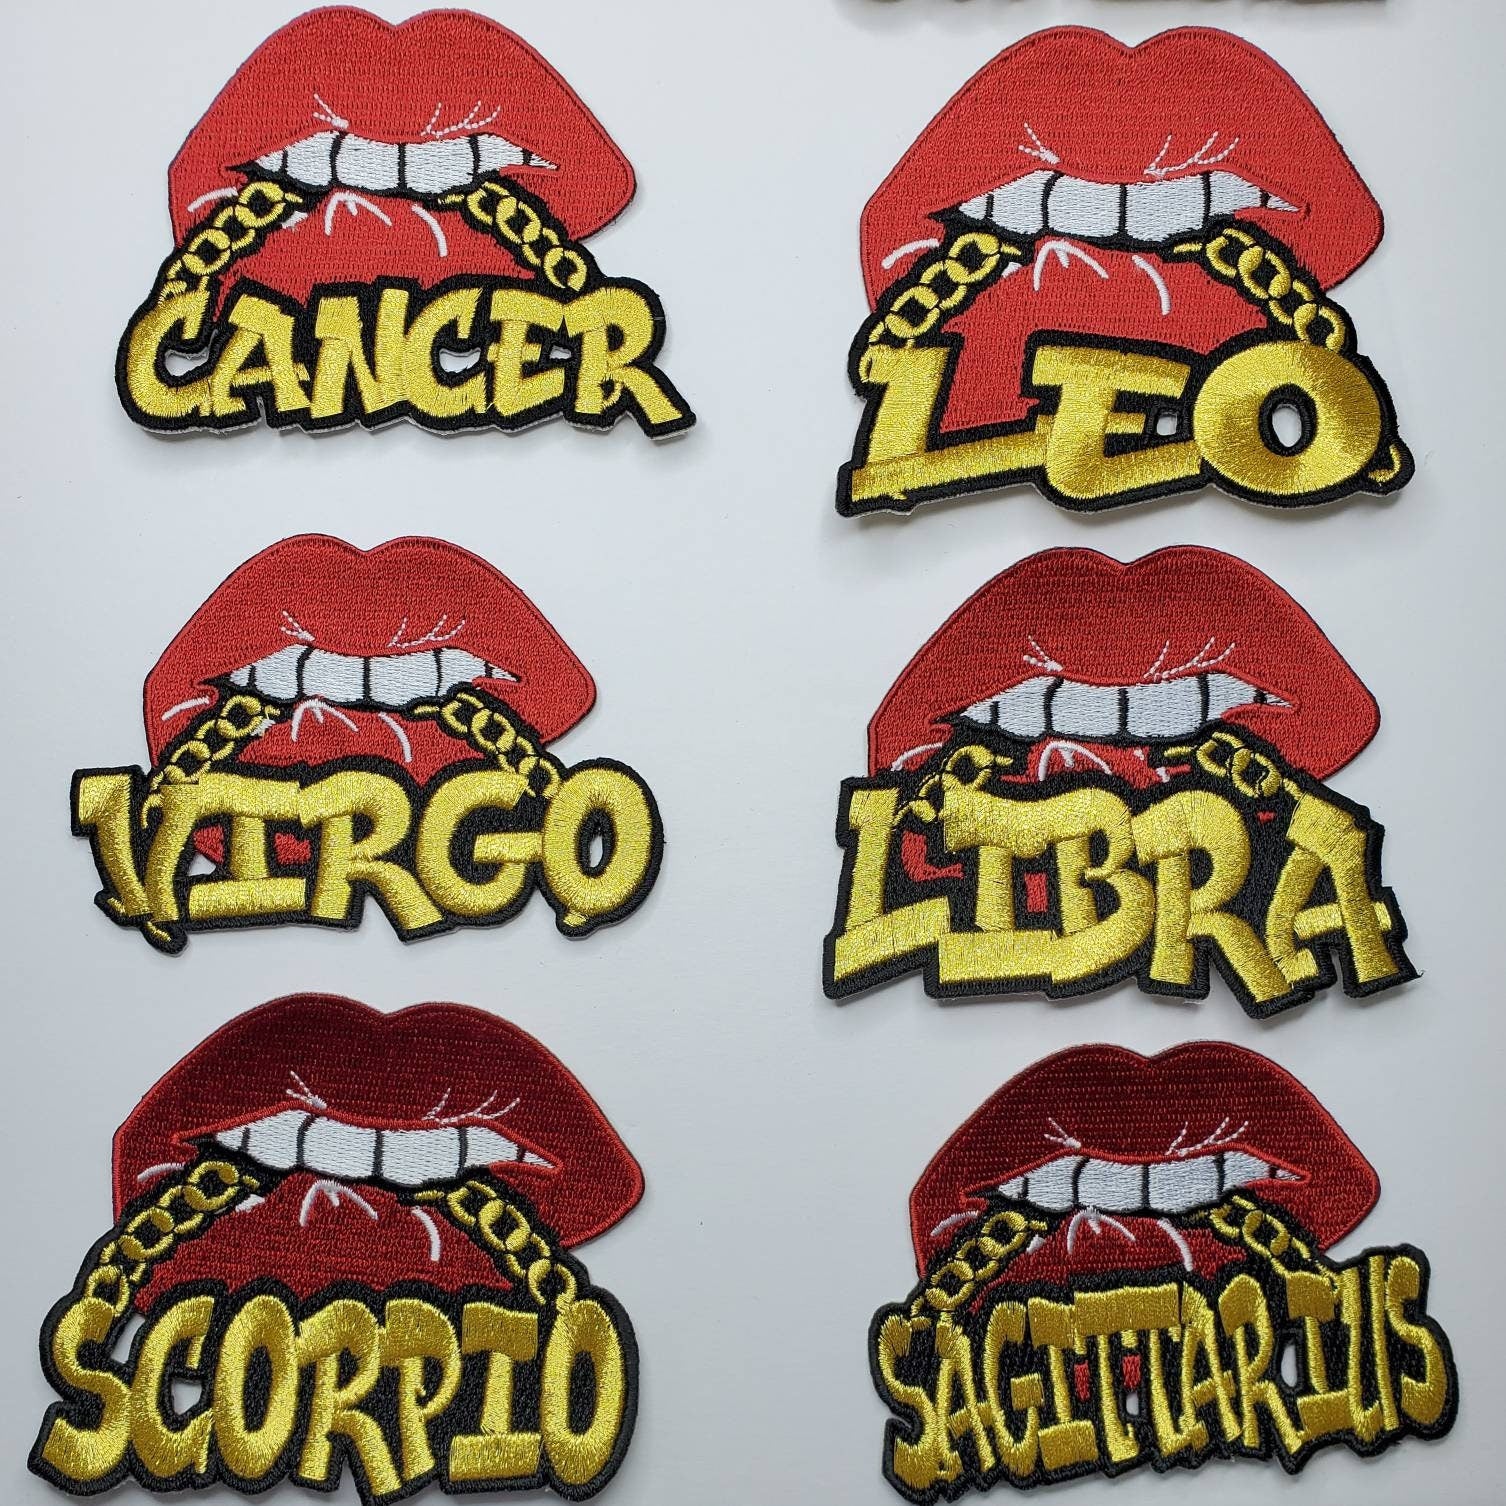 Poppin' Red Lip "Scorpio" w/Gold Metallic Chain|Iron-On Patch|Astrology Applique|Cool Embroidered Patch|DIY Patch for Denim & Accessories